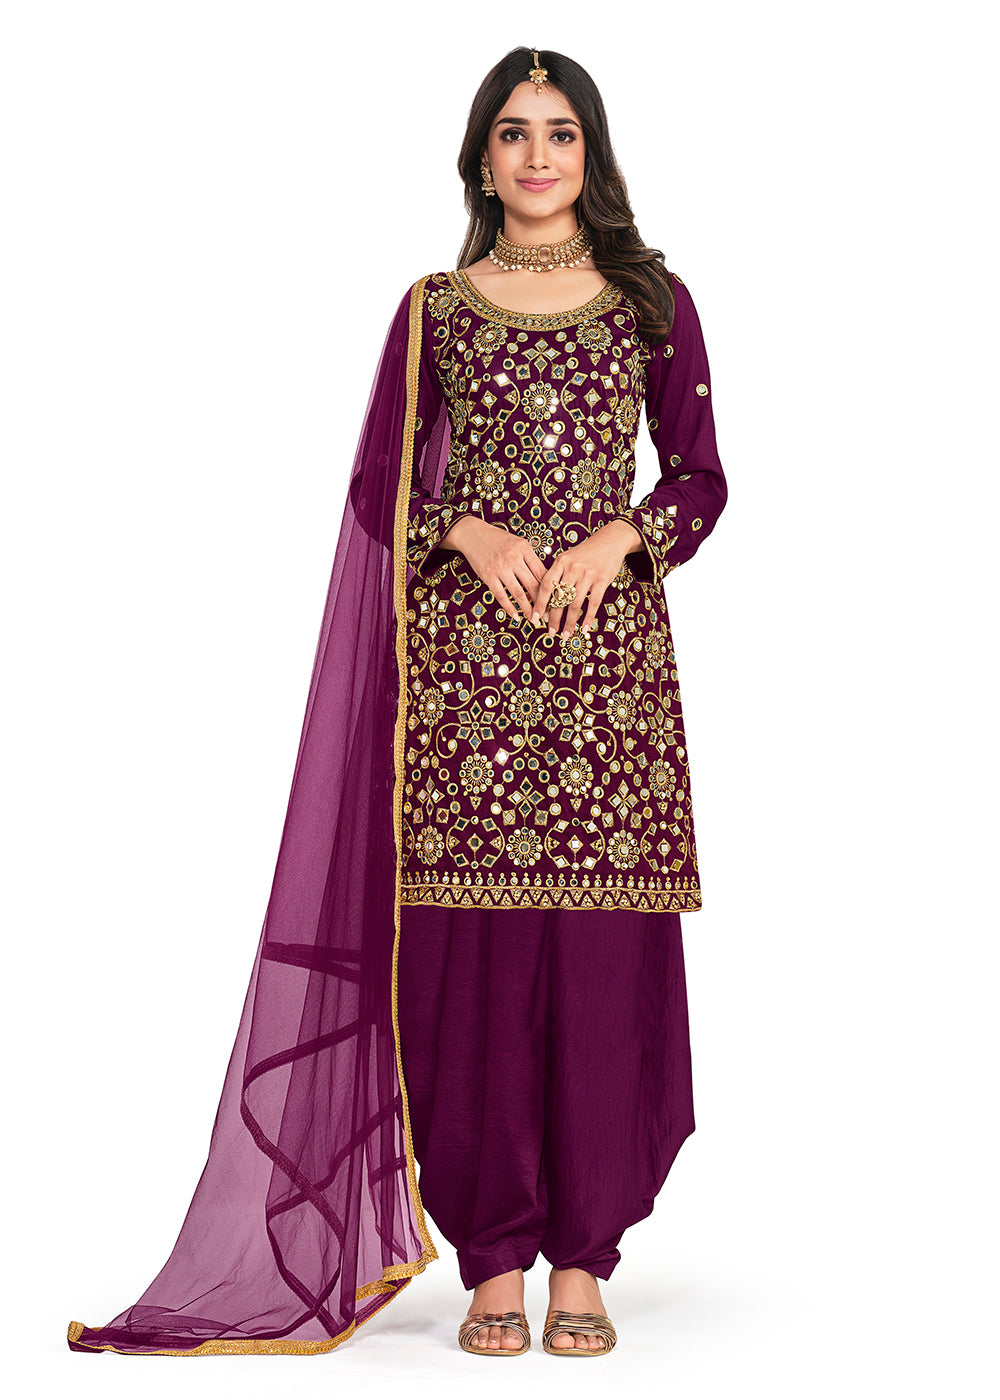 Buy Punjabi suits online in latest styles trending in 2022 - A wide range of Punjabi dresses, including Patiala salwar kameez, Get perfectly customized Punjabi/Patiala salwar kameez at affordable prices